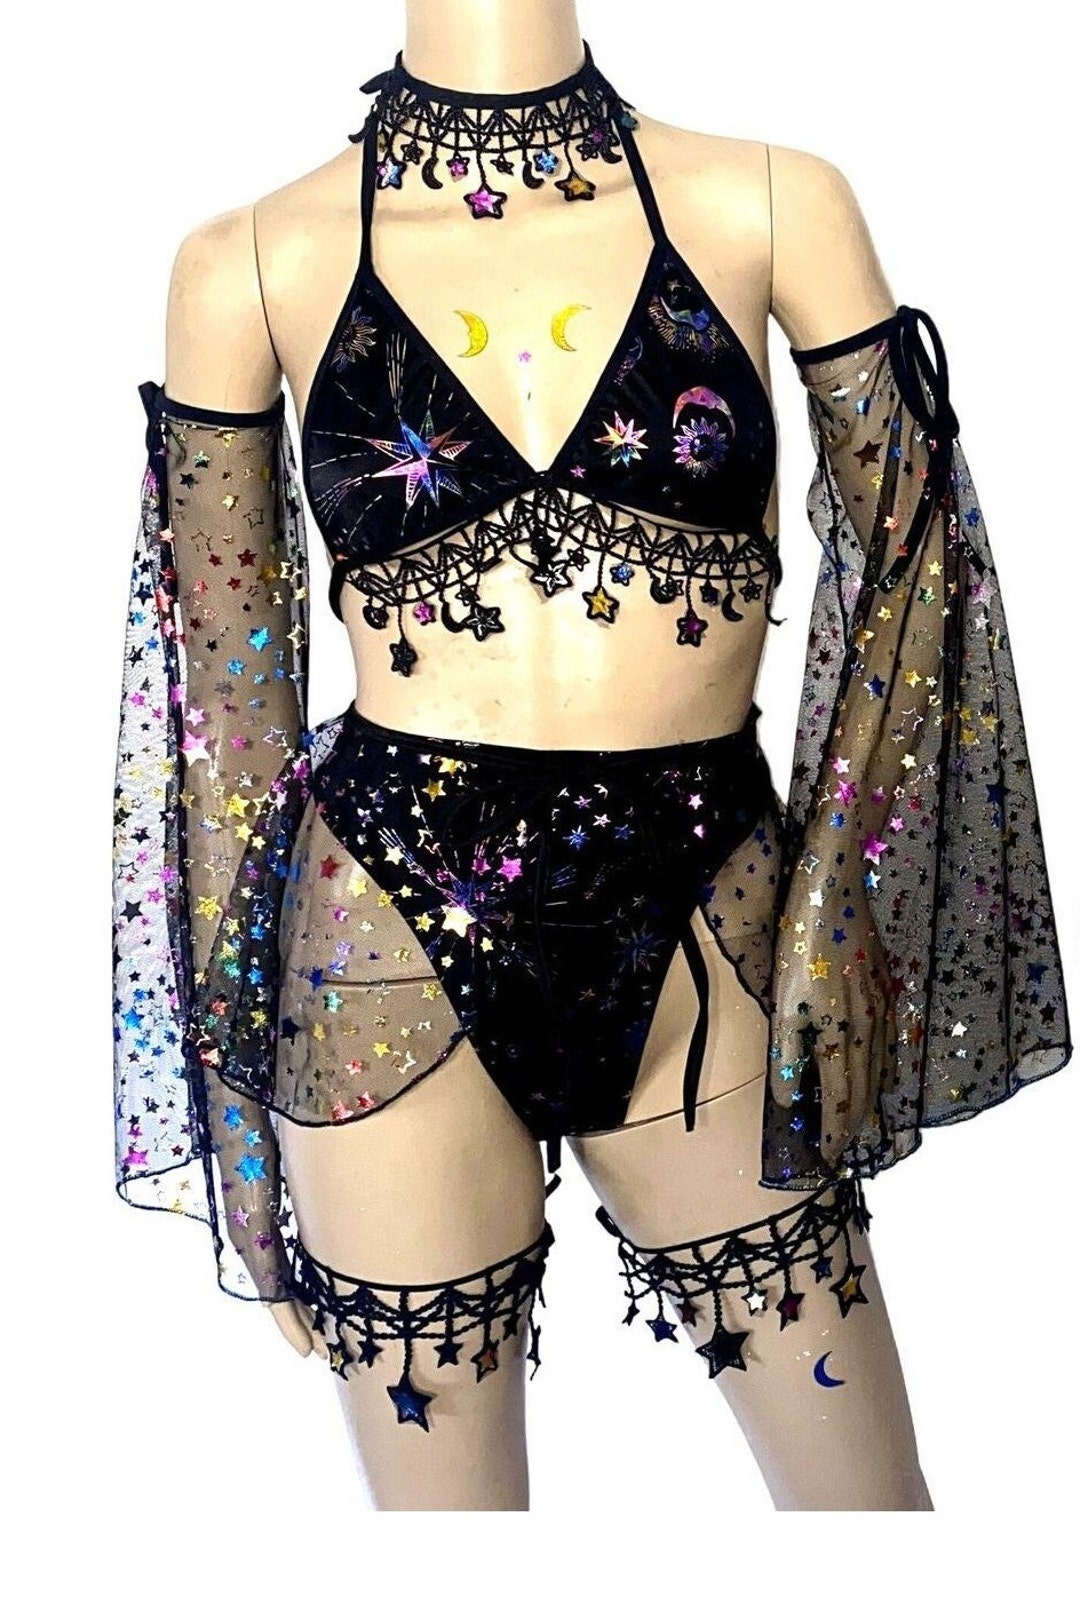 Stars and Moons Galaxy Celestial Rave Festival Outfit Pieces Sold